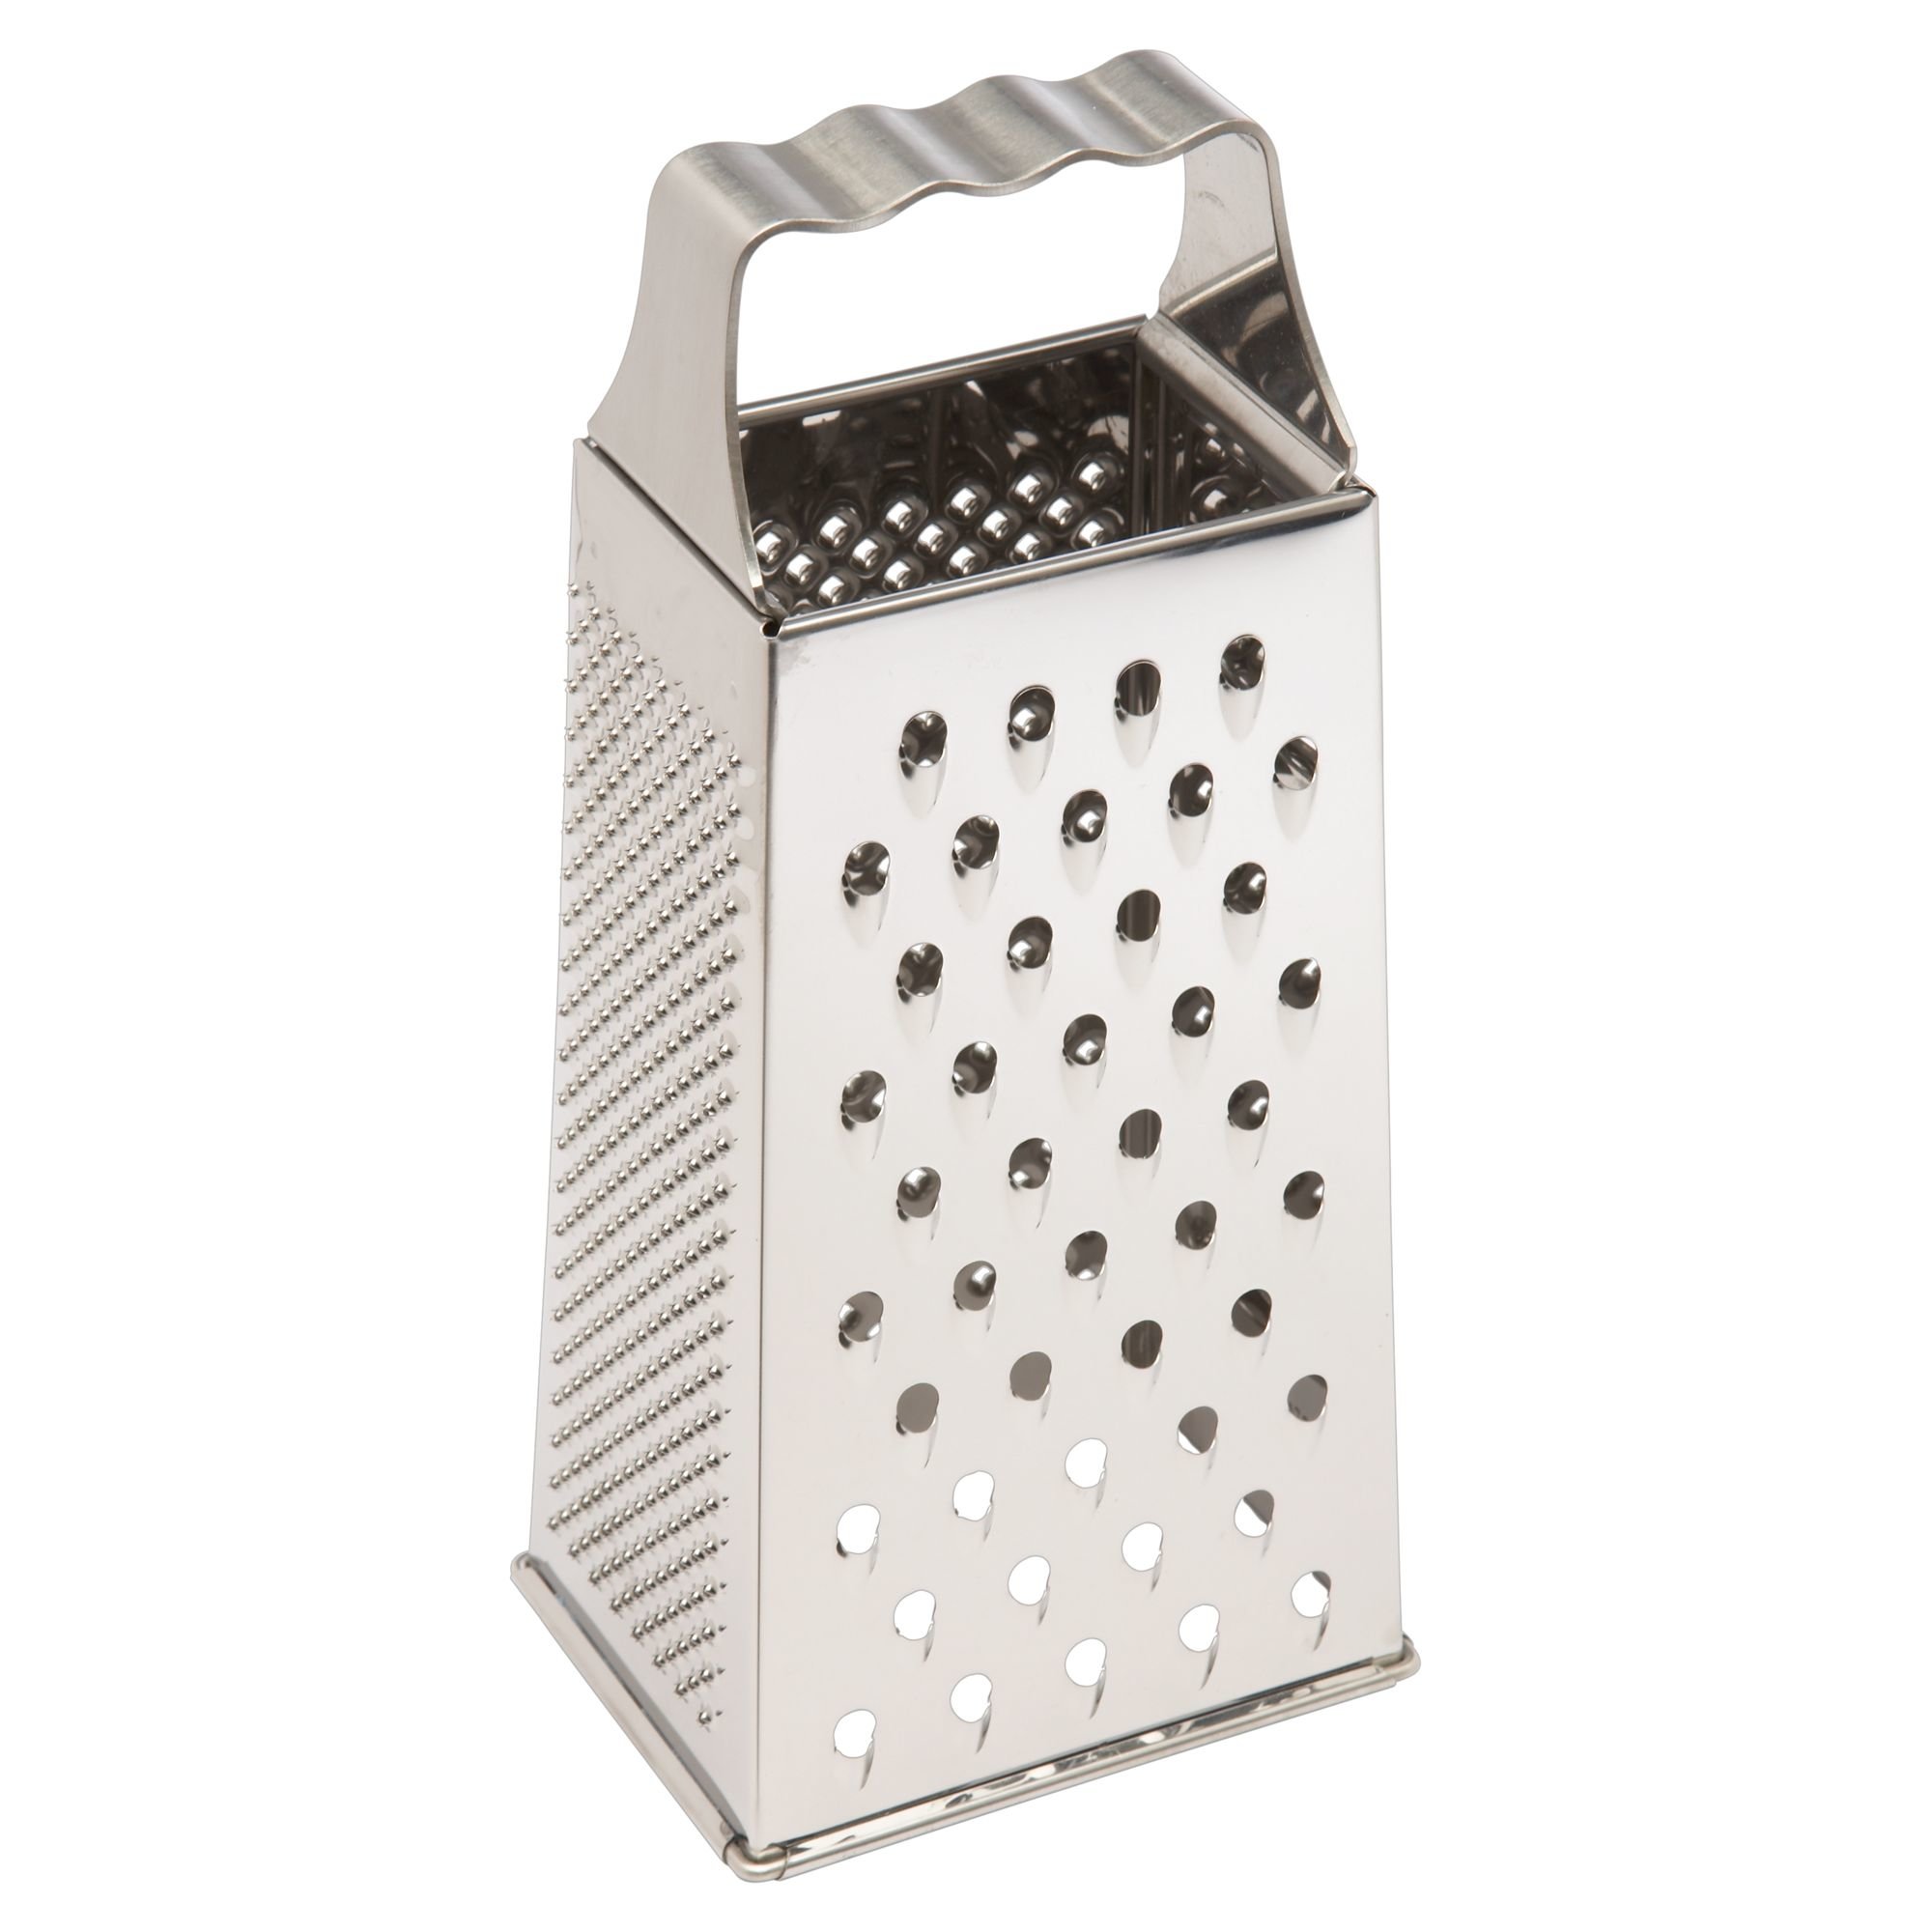 Cheese grater comp.